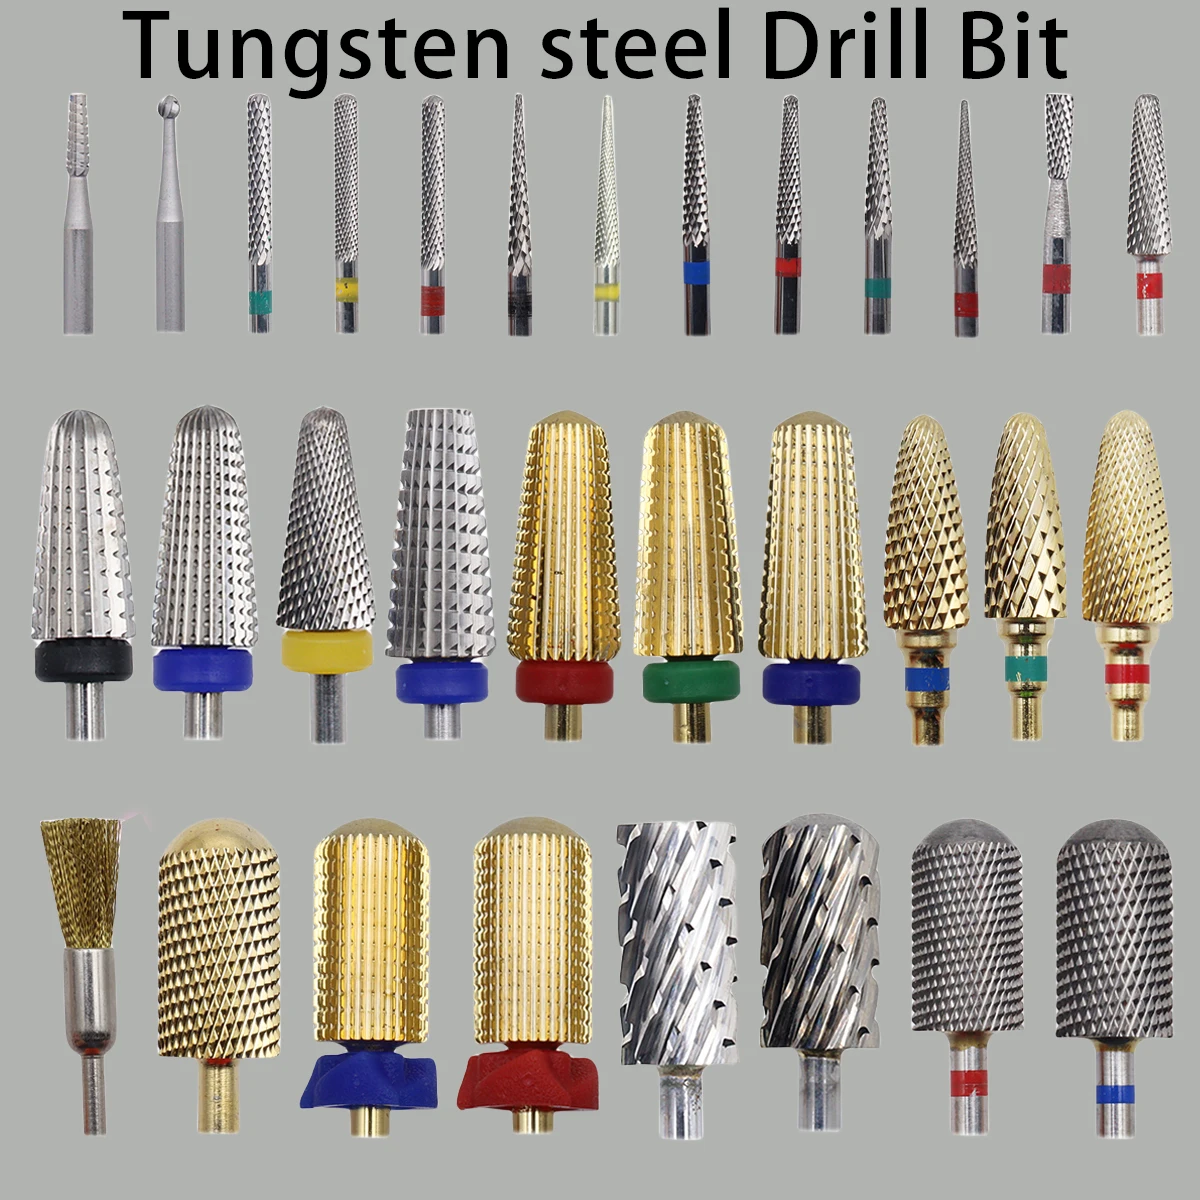 1pcs 60 Types Tungsten Carbide Nail Drill Bit Electric Nail Mills Cutter for Manicure Machine Nail Files Accessories 1pcs random color nail drill brush electric 2 35mm machine professional nail art drill bit cleaning manicure drills accessories